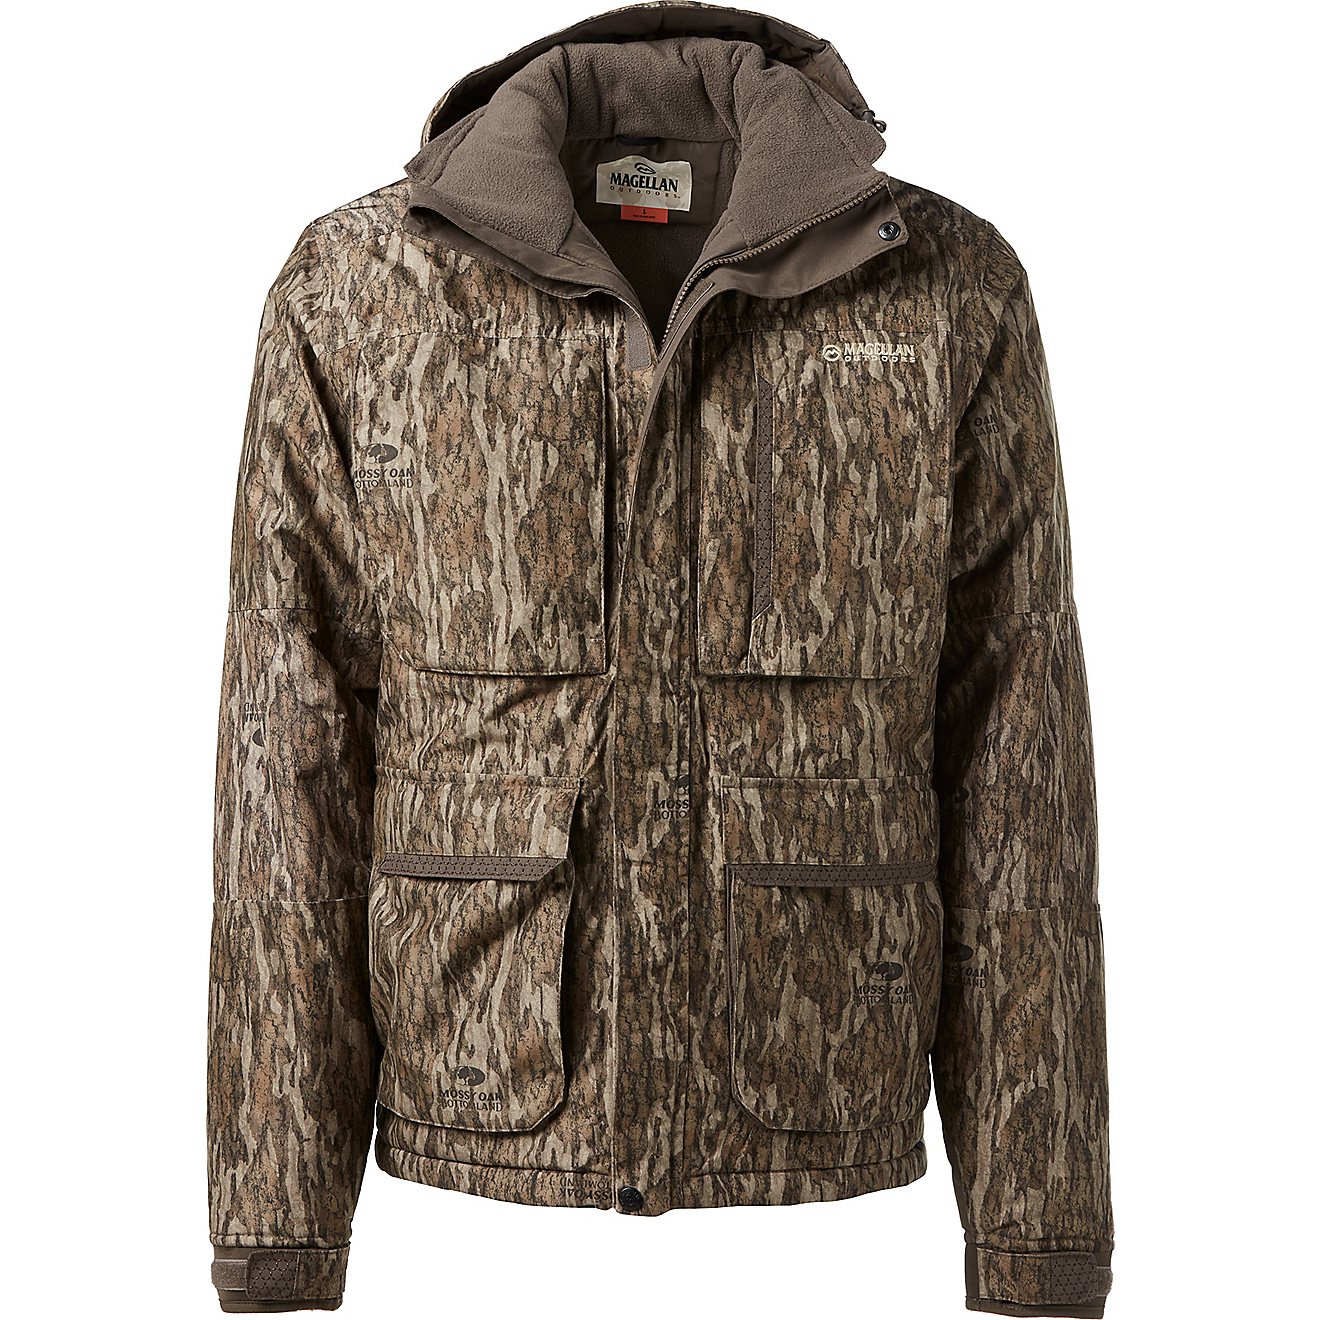 Magellan Outdoors Men's Pintail Waterfowl Insulated Jacket                                                                       - view number 1